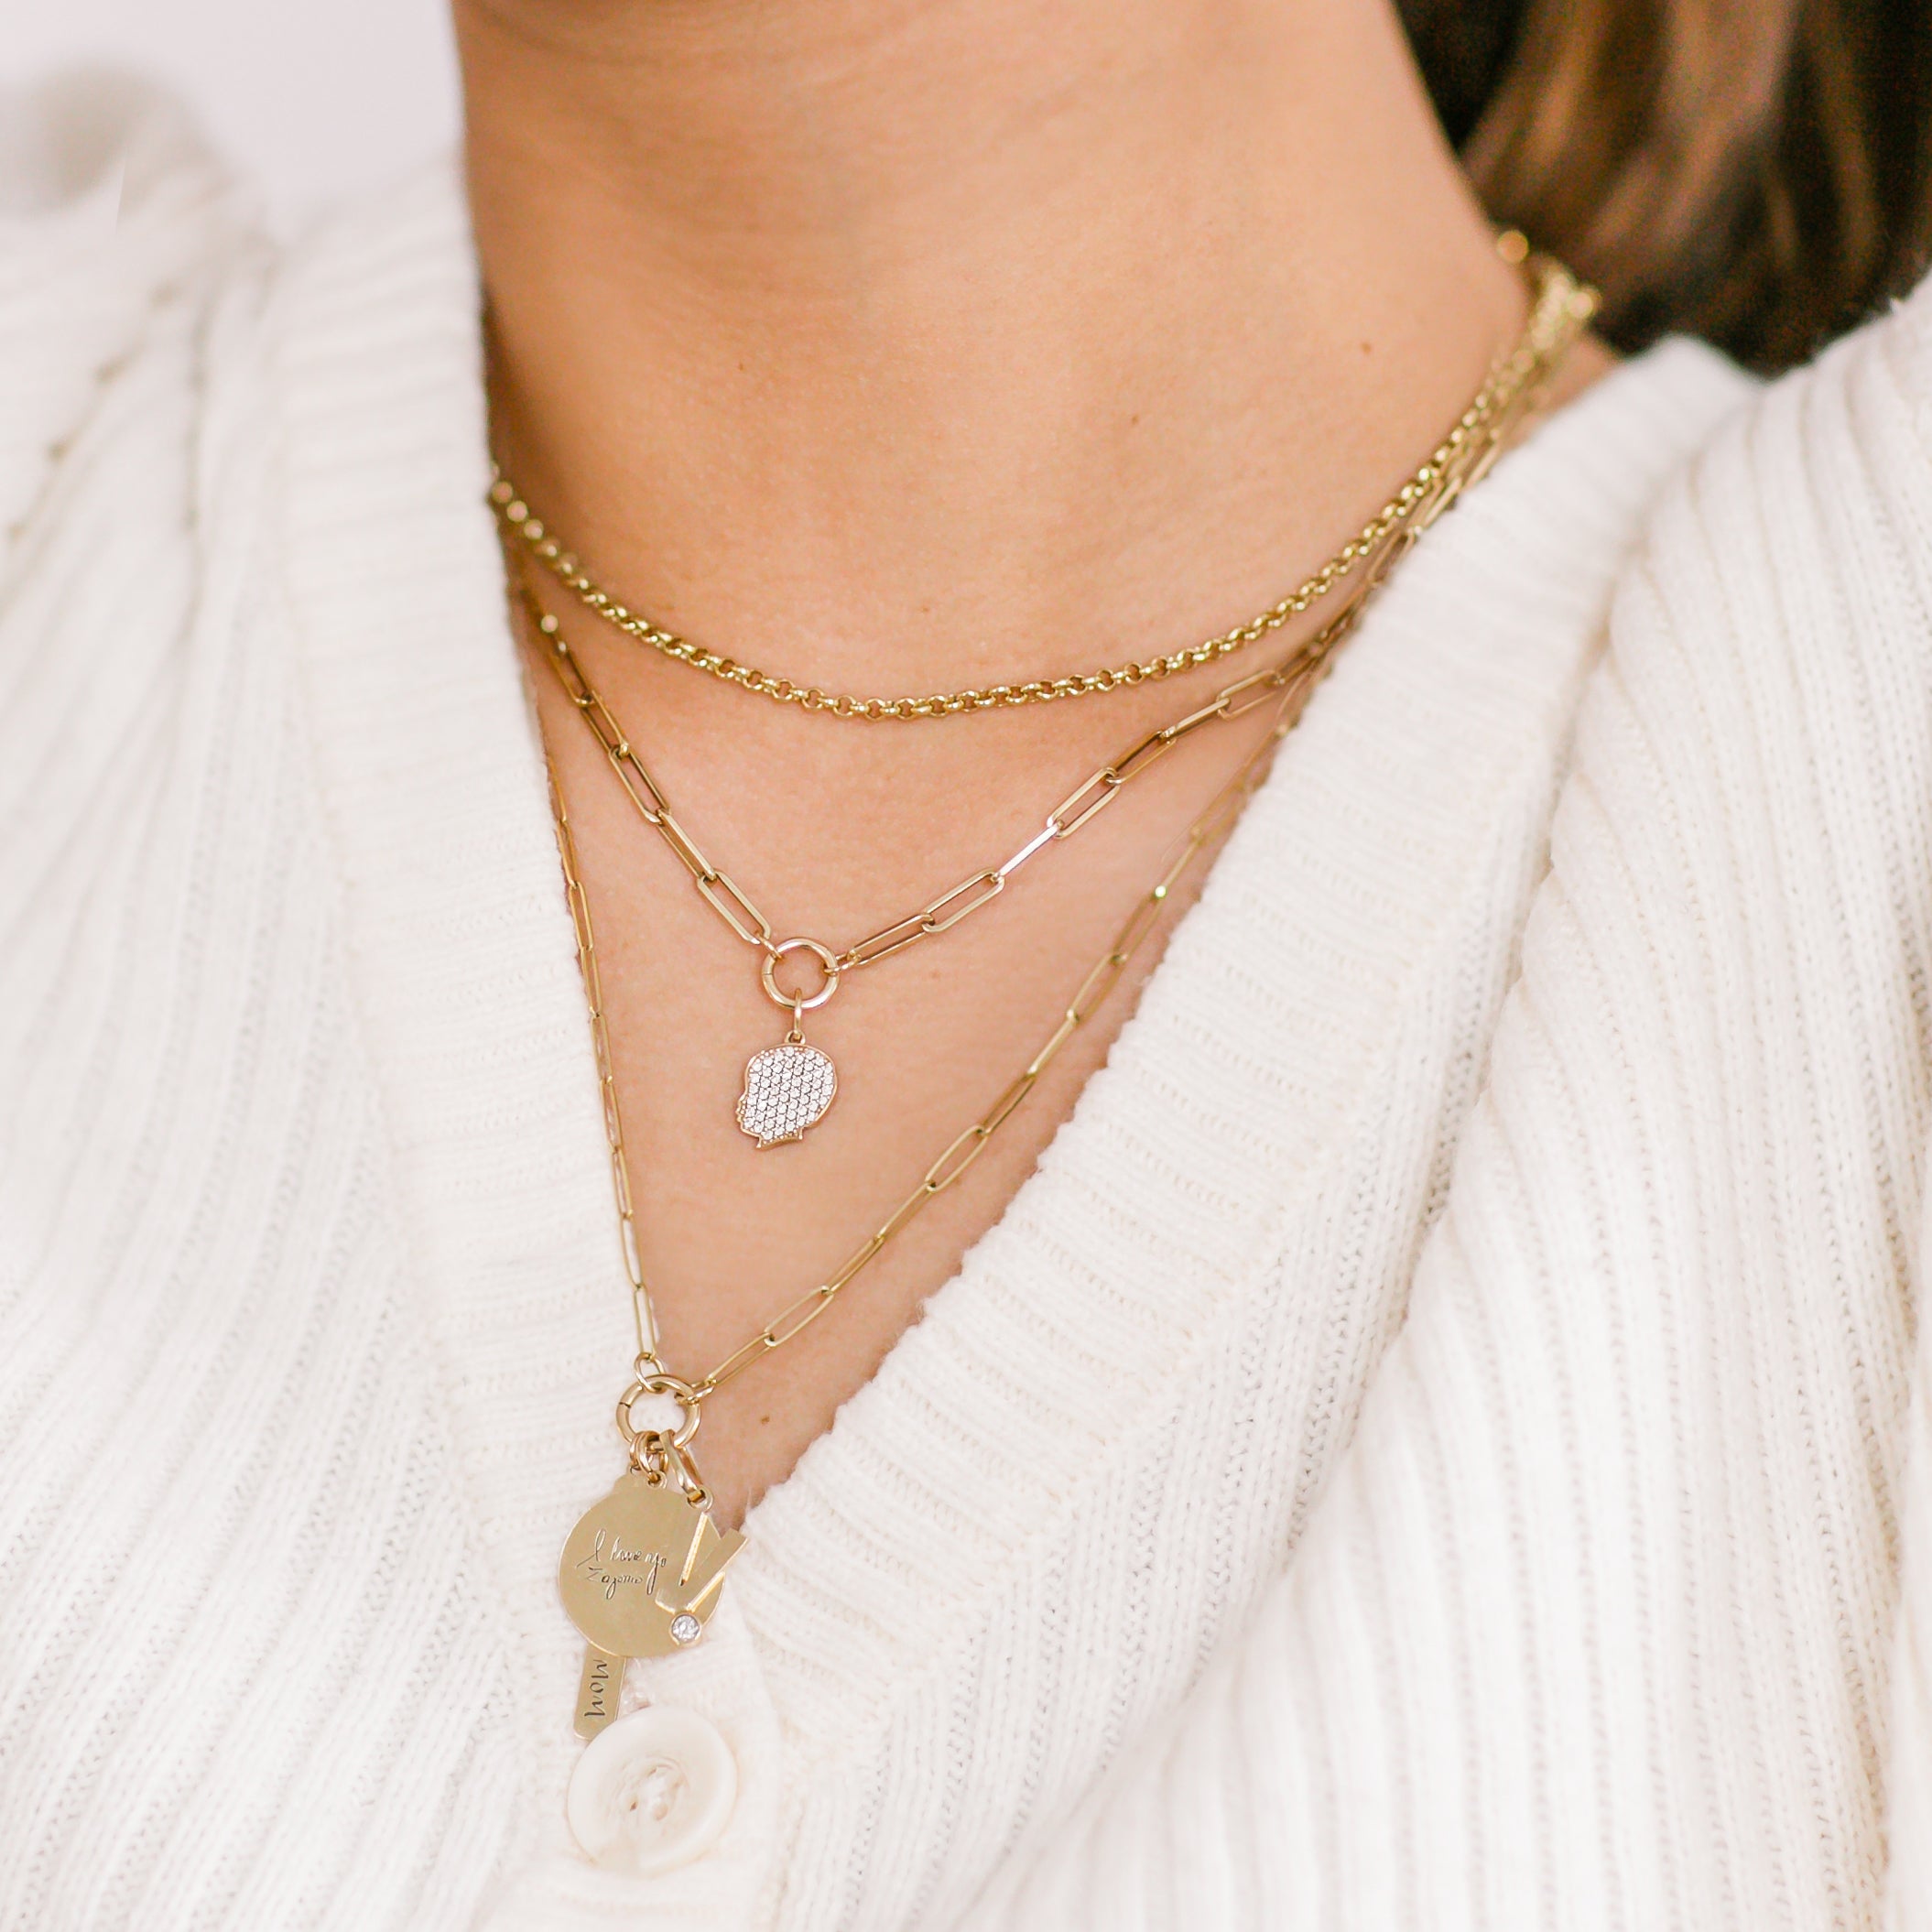 Pave Diamond Silhouette Charm layered with other necklaces